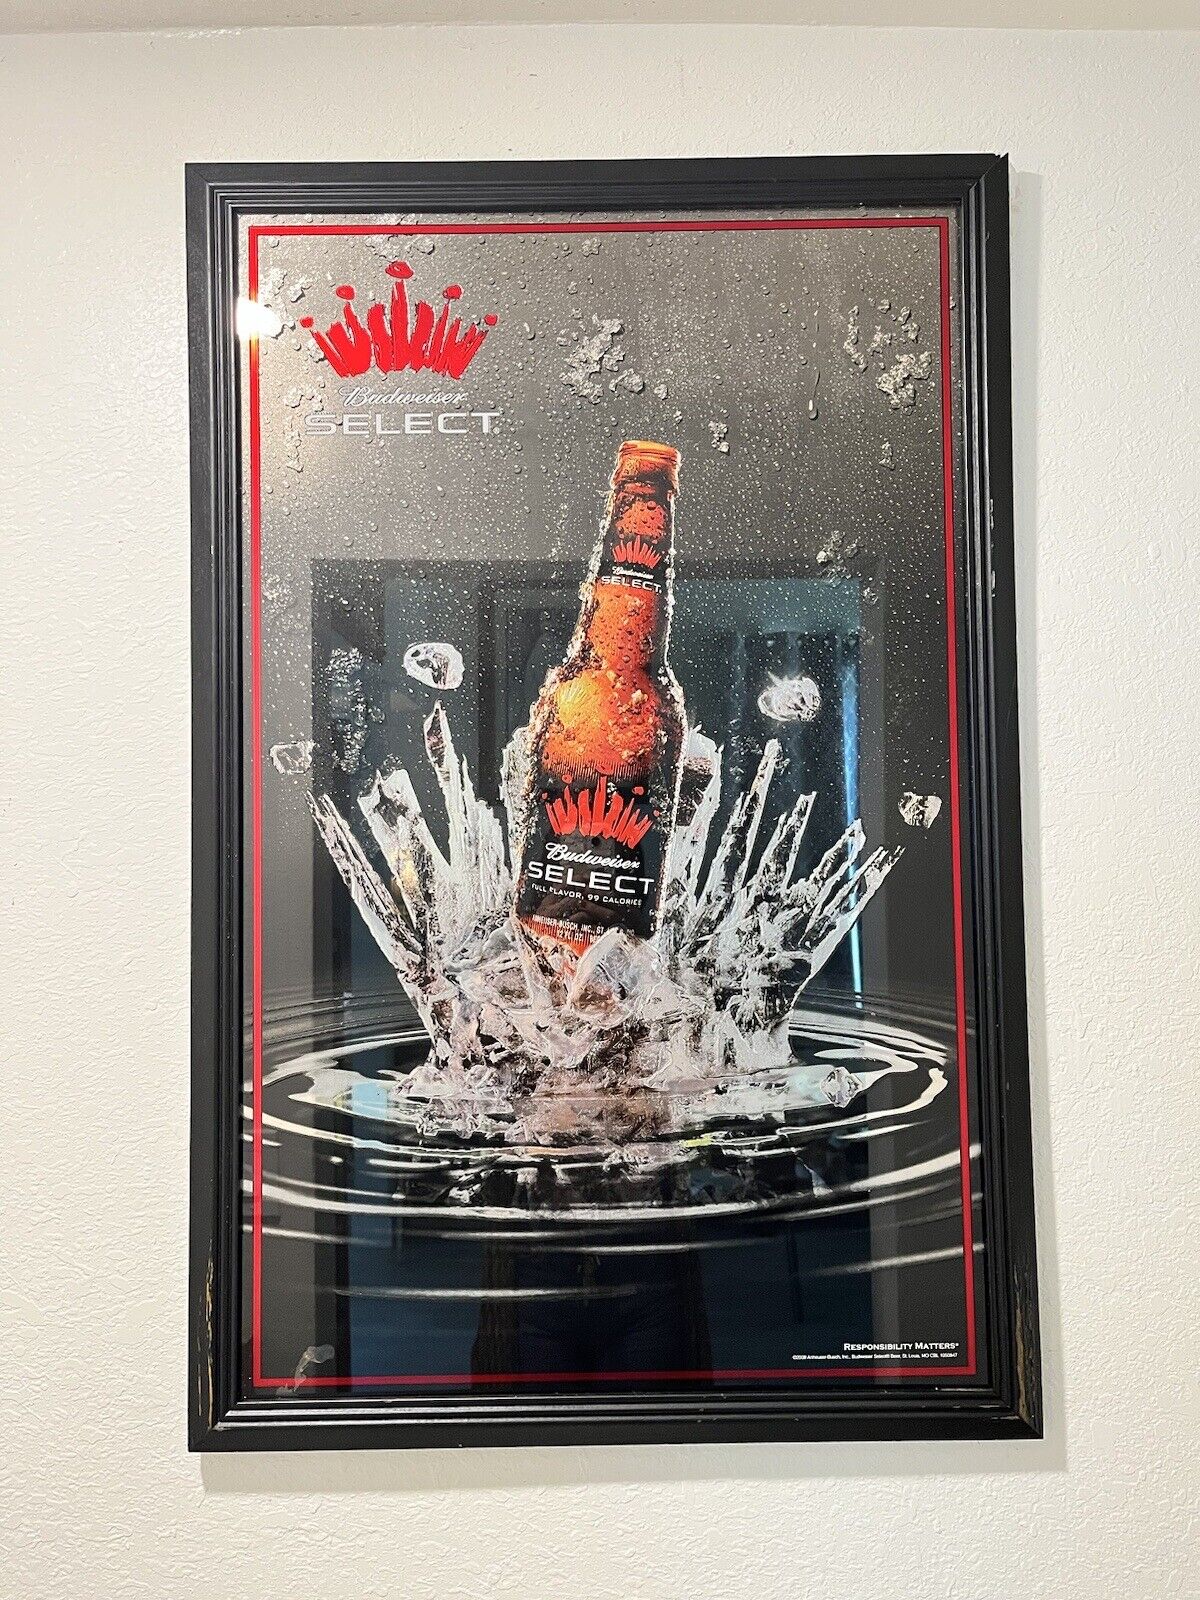 2008 Budweiser Commemorative Select Mirror / Glass Poster Framed For Man-cave